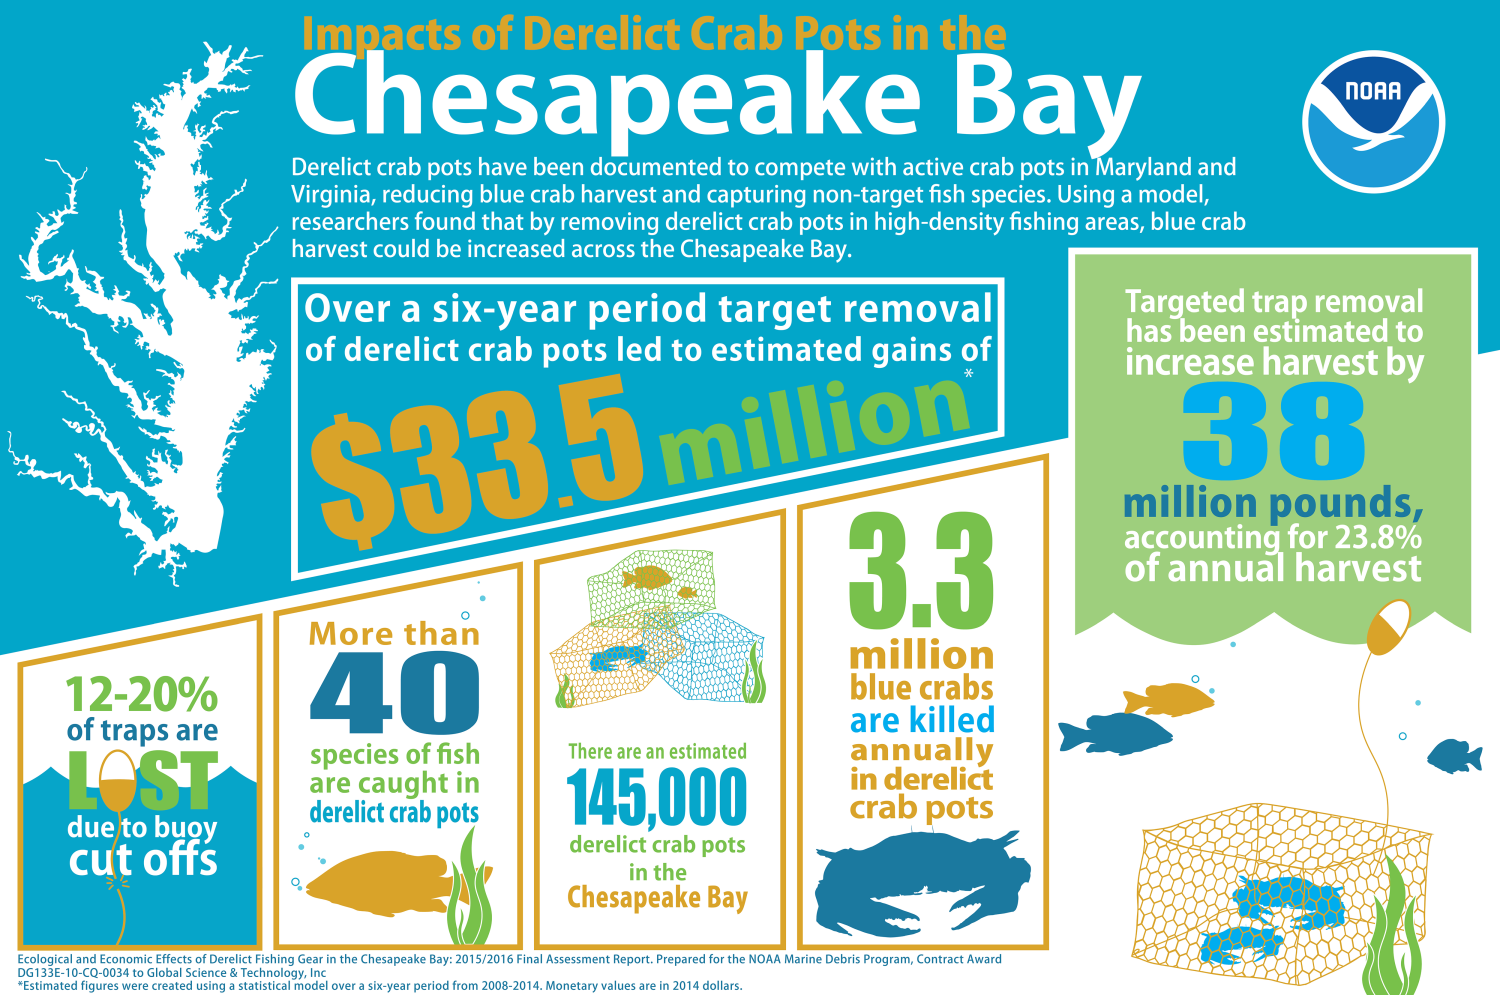 Impacts of Derelict Crab Pots in the Chesapeake Bay